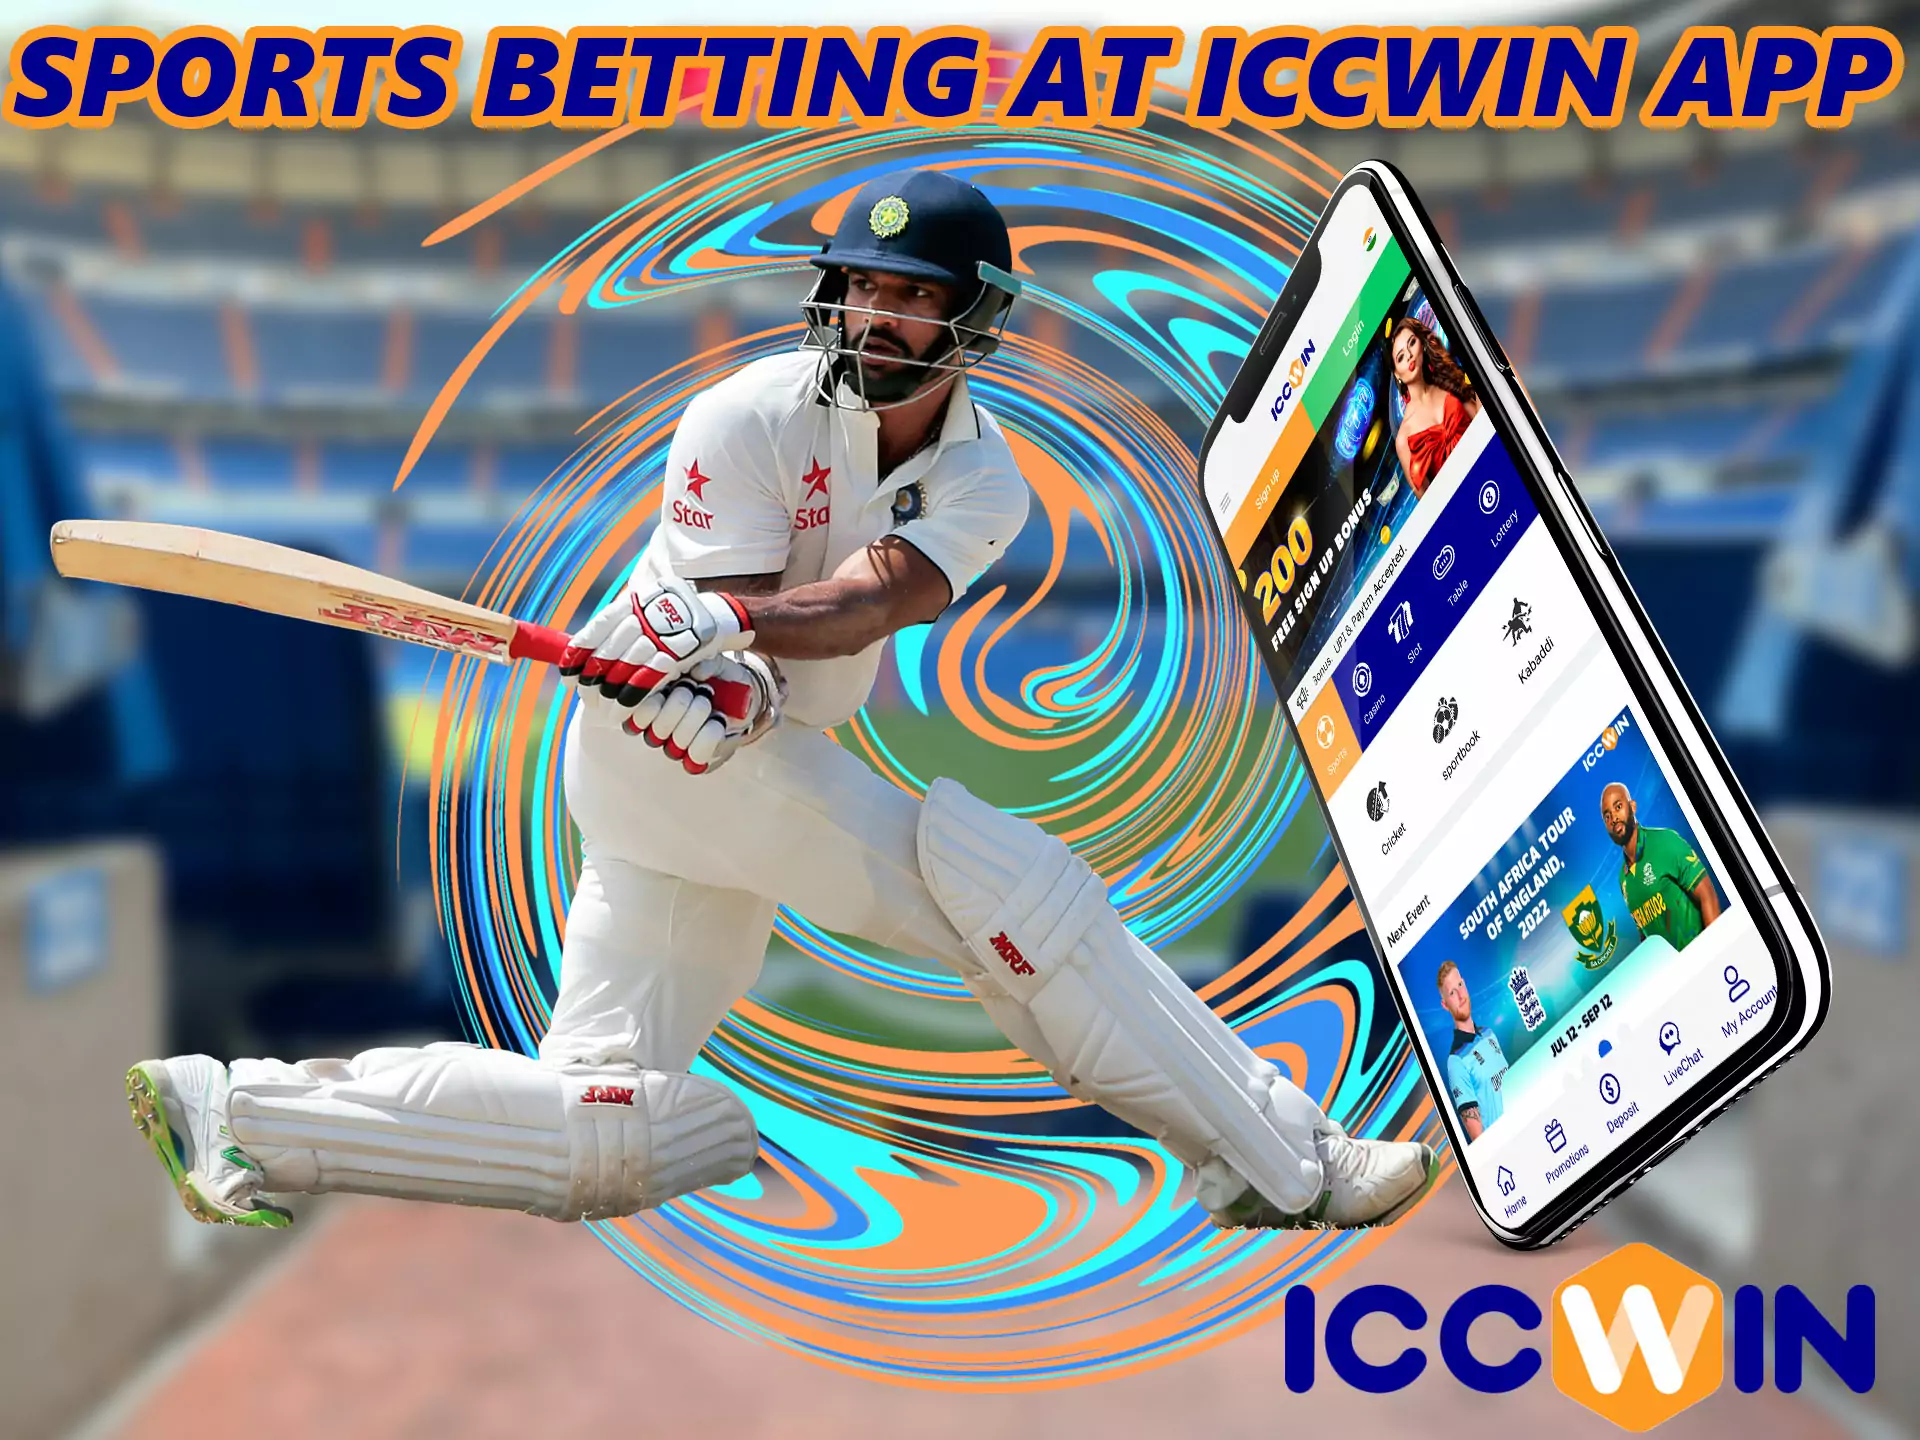 Cricket betting is incredibly popular among Indian bettors, and you can also bet on other disciplines here.